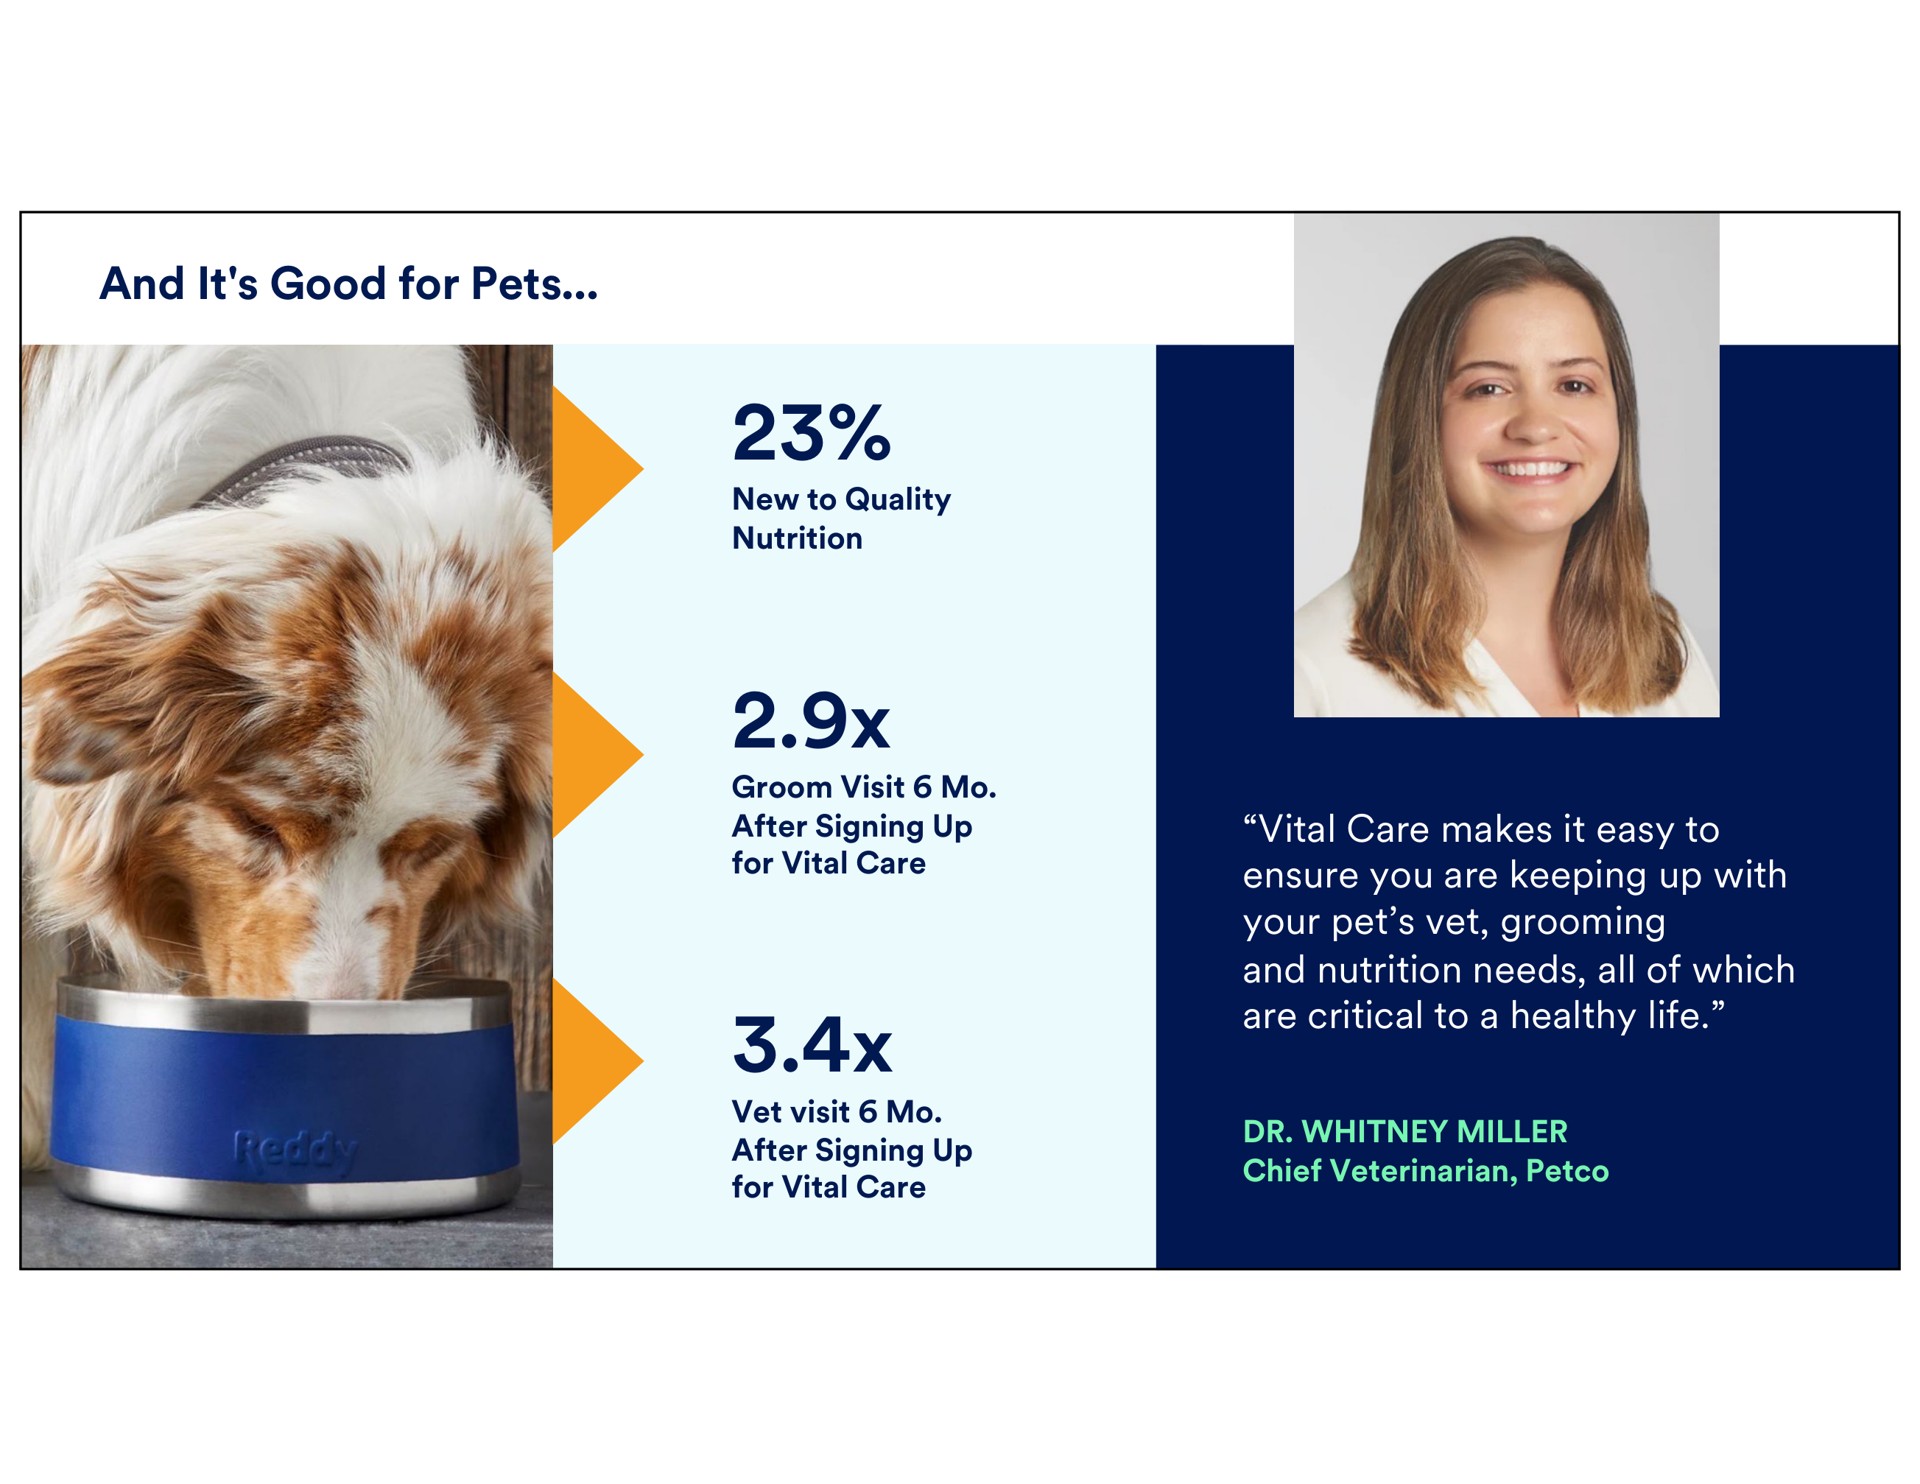 and it good for pets new to quality nutrition groom visit after signing up vital care chief veterinarian vital care makes easy to ensure you are keeping up with your pet vet grooming nutrition needs all of which are critical to a healthy life vet visit after signing up vital care aye | Petco